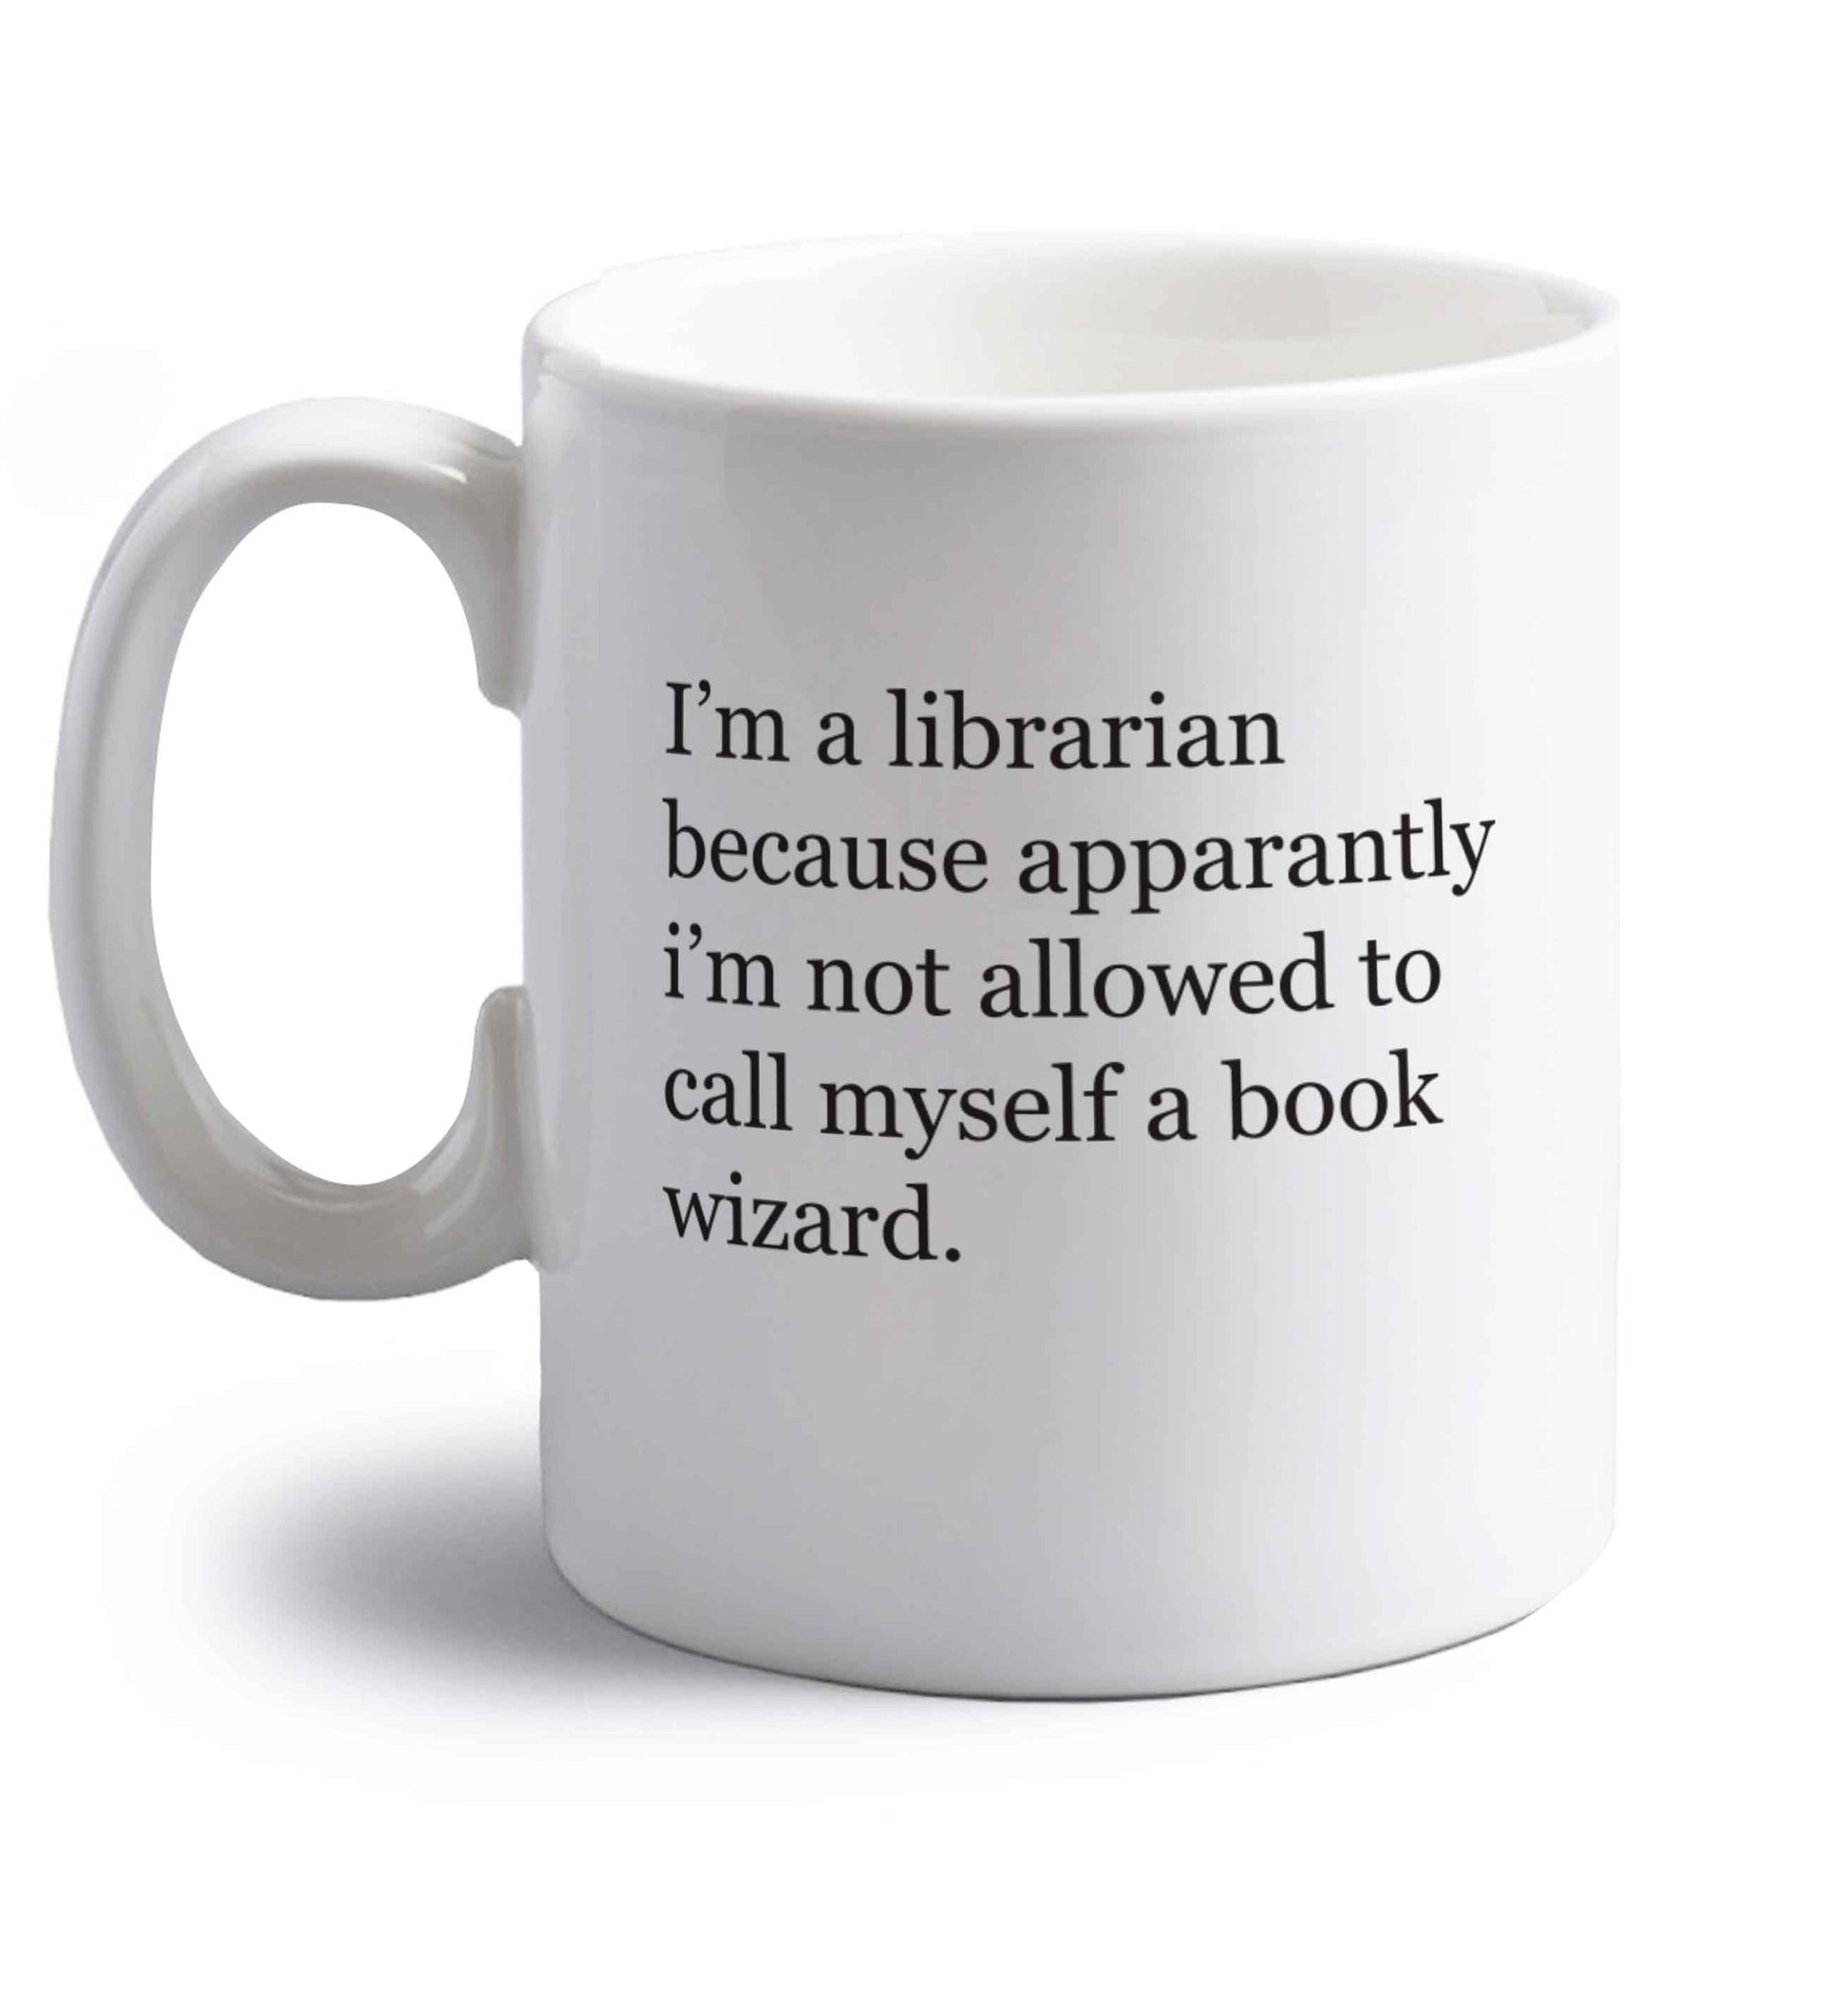 iÕm a librarian because apparantly iÕm not allowed to call myself a book wizard right handed white ceramic mug 